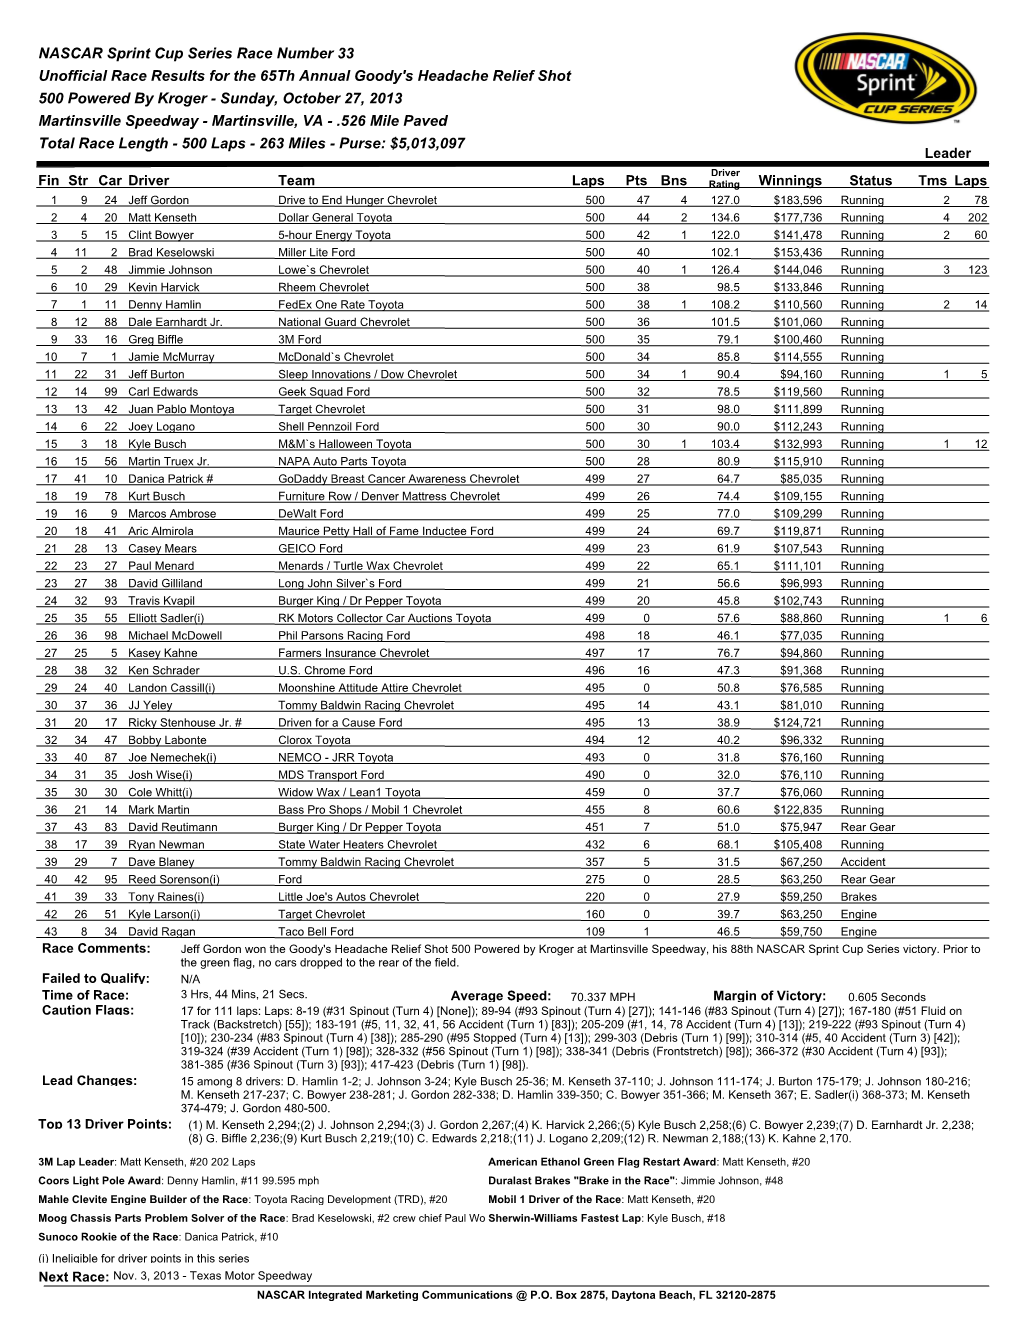 NASCAR Sprint Cup Series Race Number 33 Unofficial Race Results